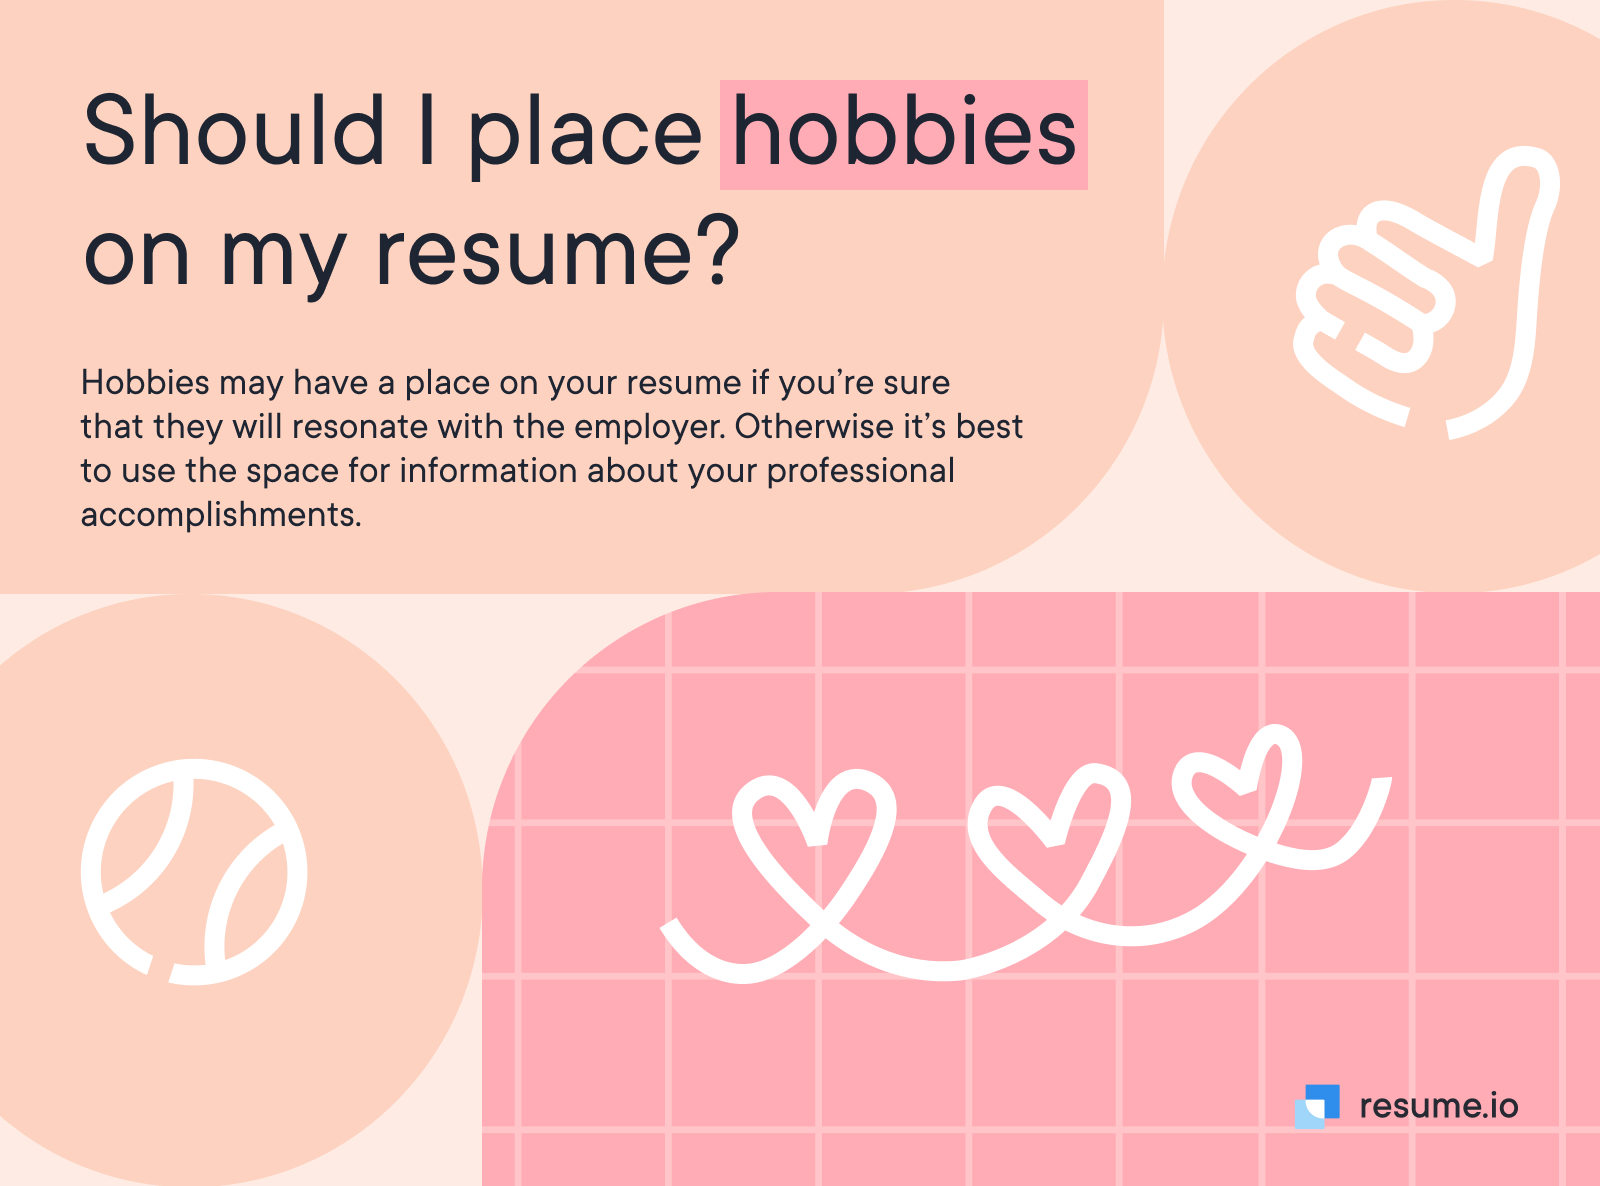 Should I place hobbies on my resume?